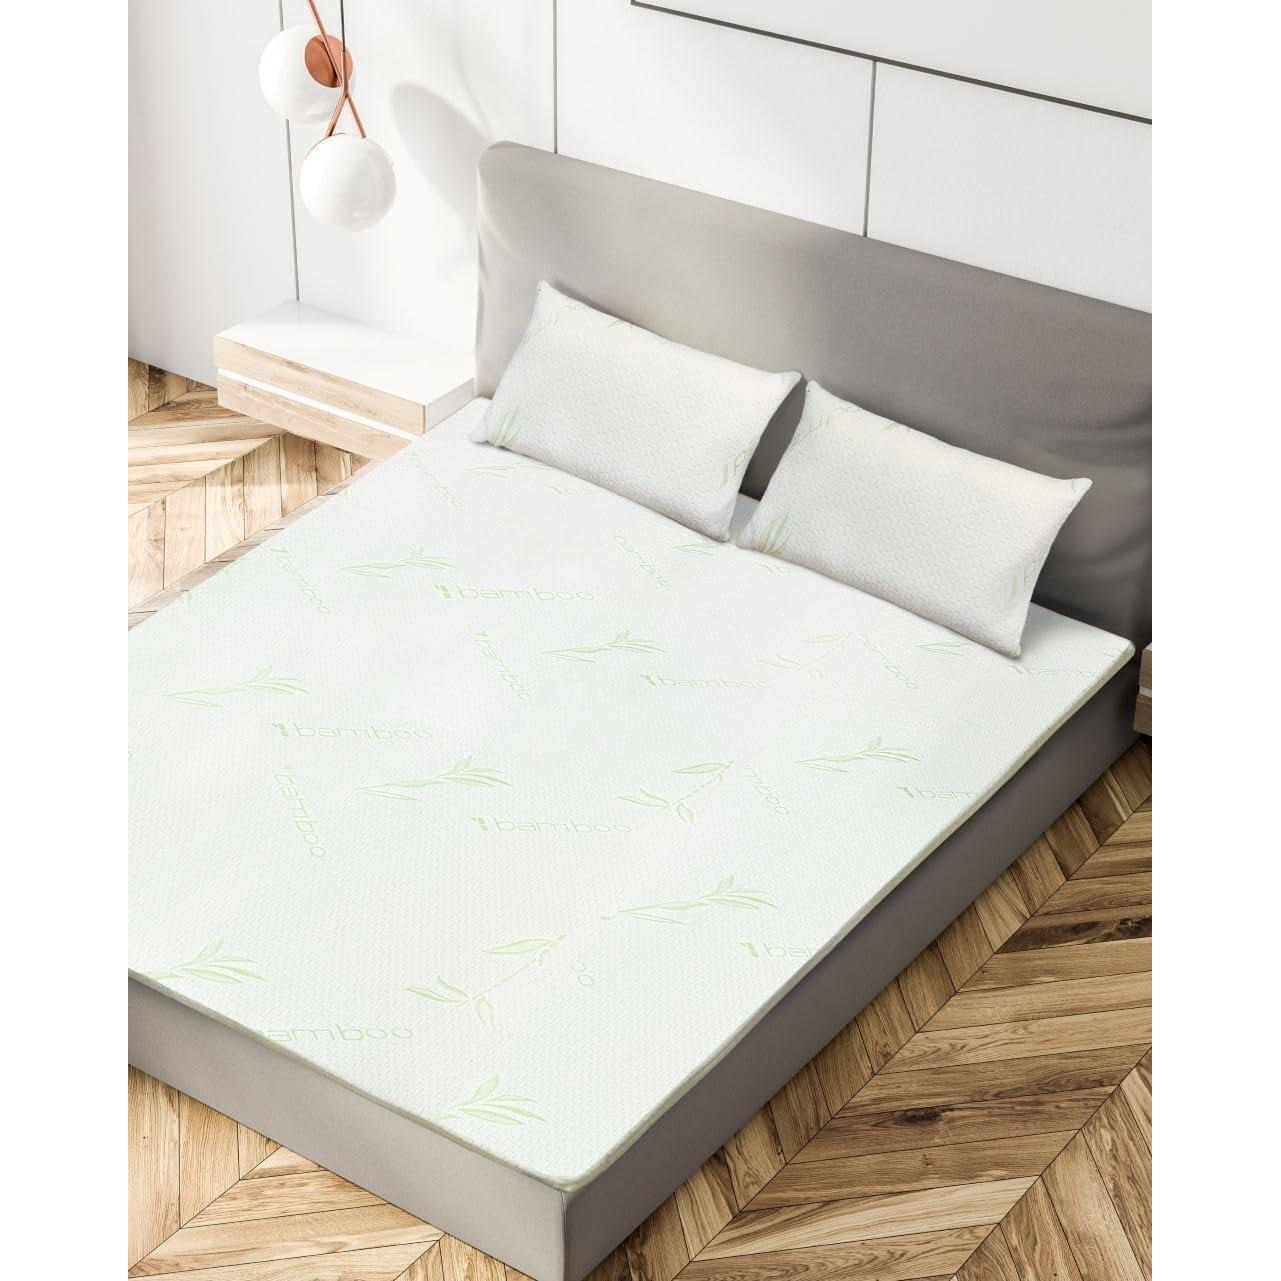 Memory Foam Mattress Topper With Organic Bamboo Cover 2cm Deep - image 1